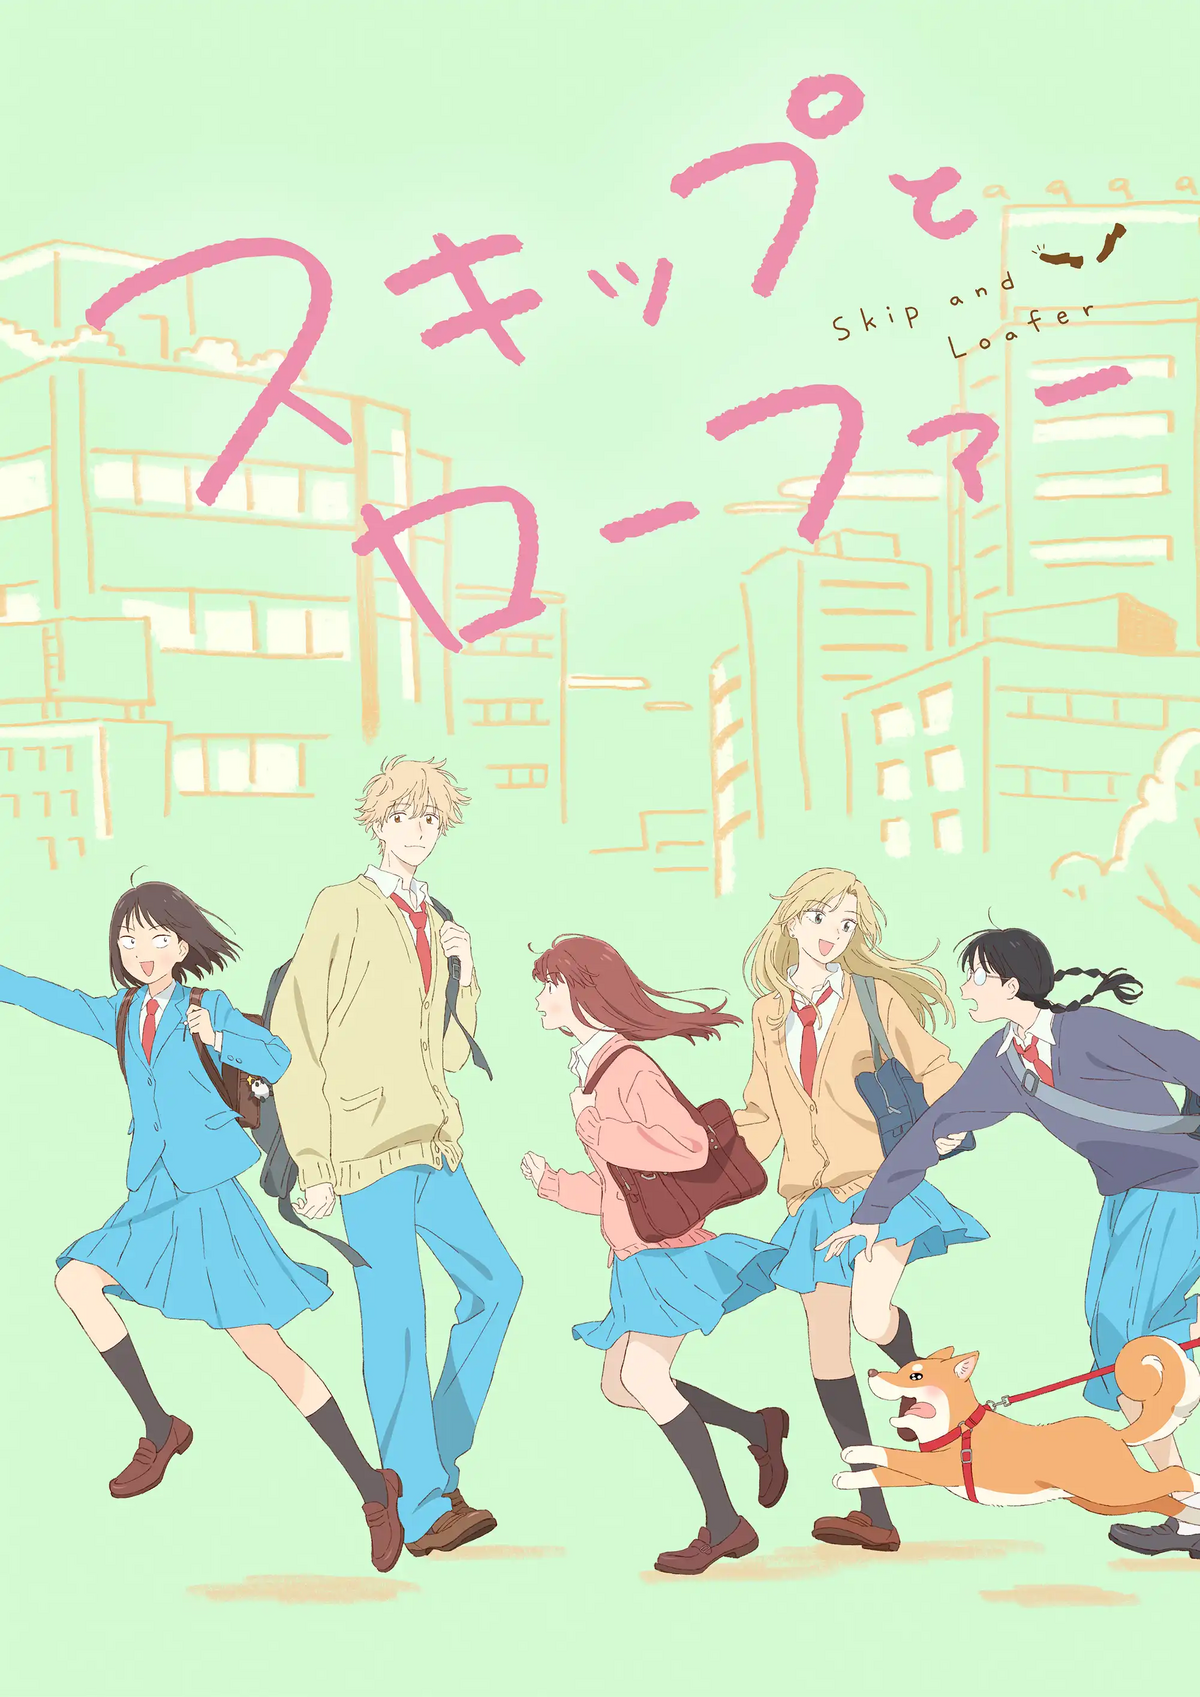 Skip and Loafer Is a Nostalgic Version of the Classic Kimi ni Todoke